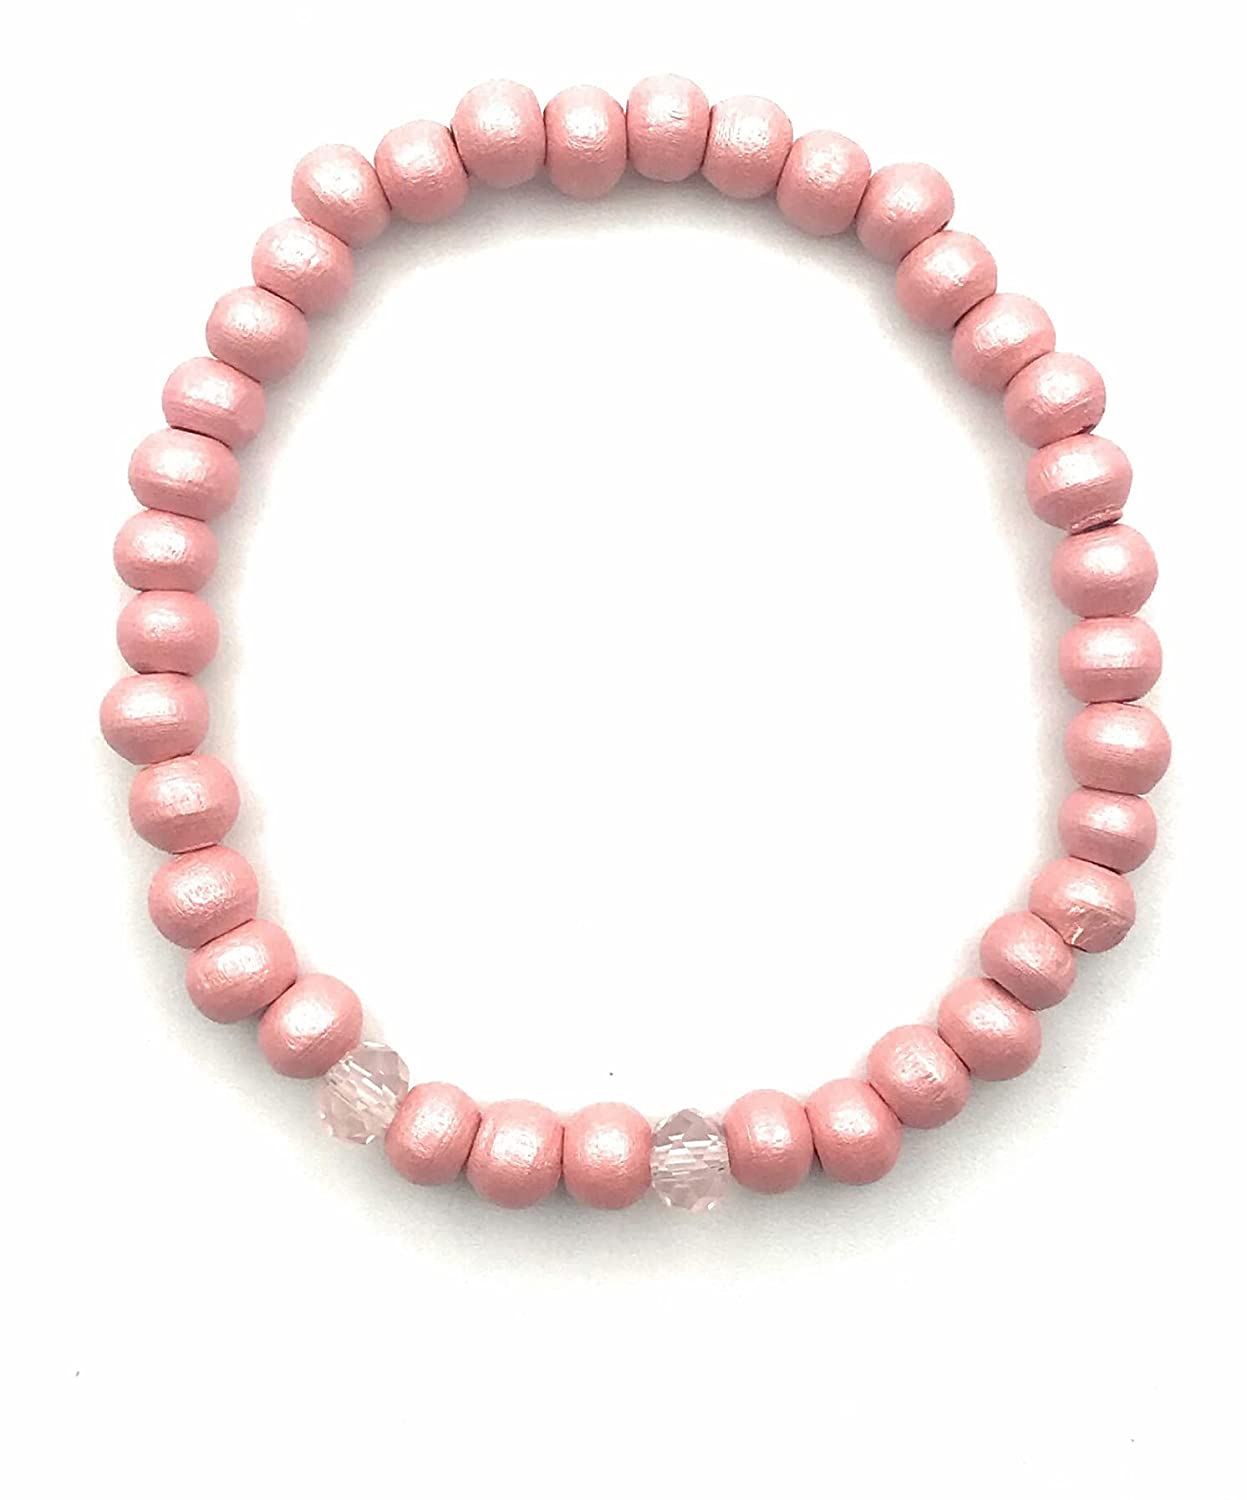 Set of 4 Beaded Stretch Bracelets in Pink Grey and White with Silver Accent